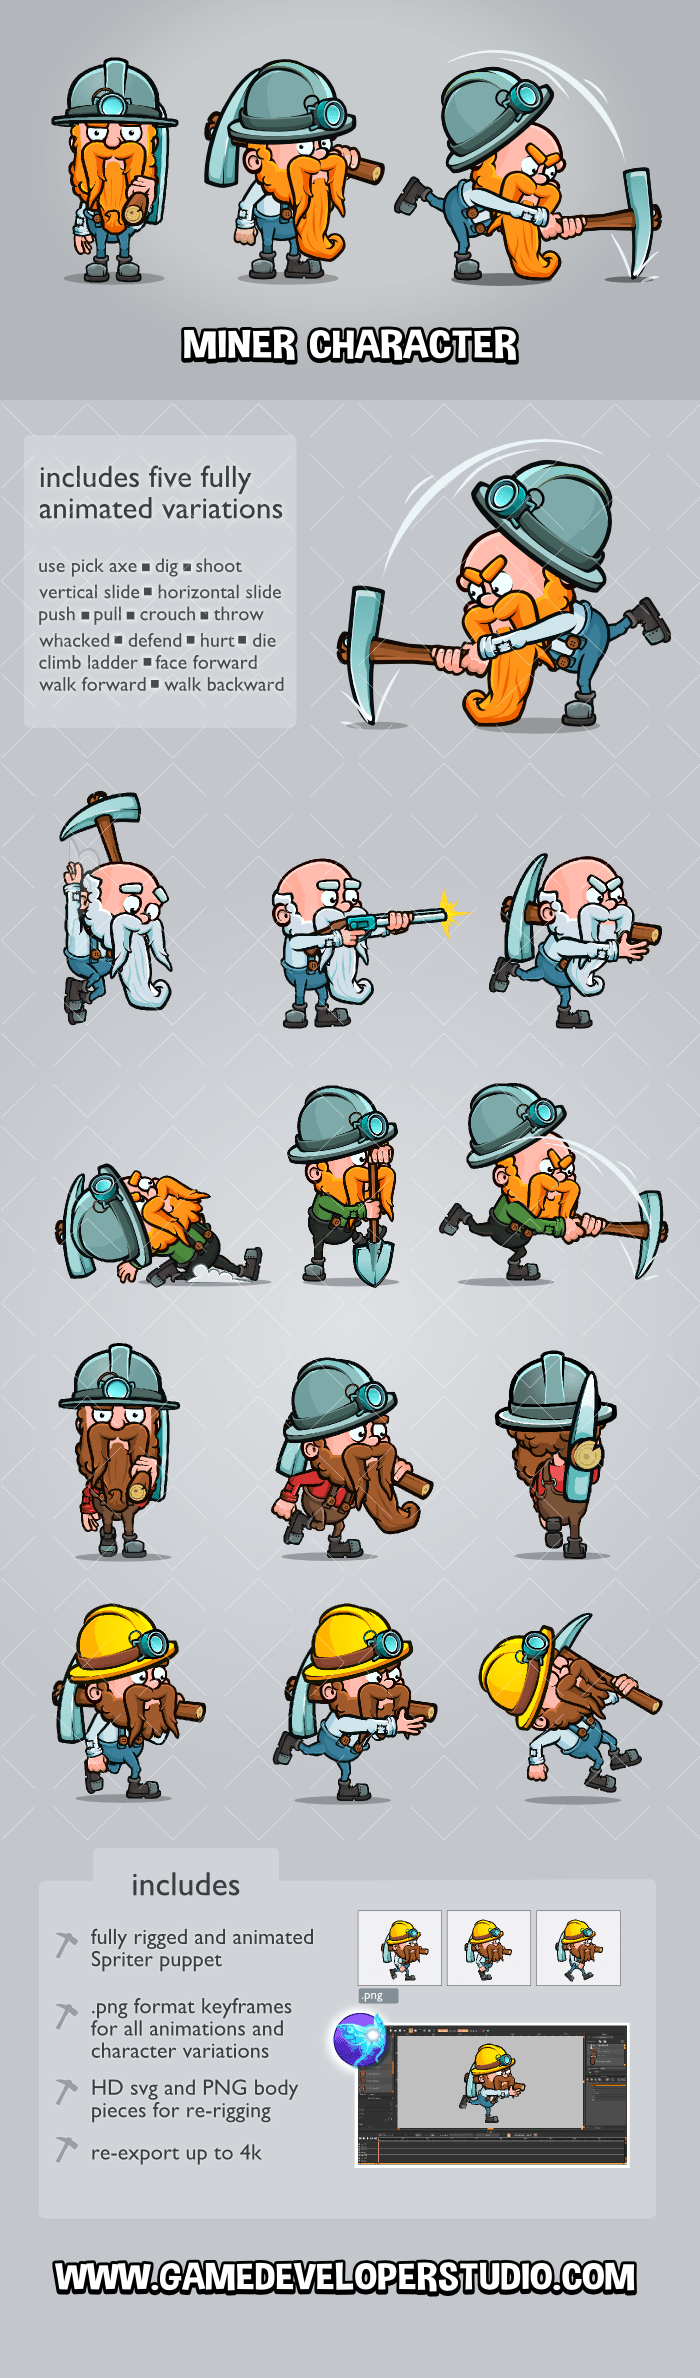 Animated miner game character